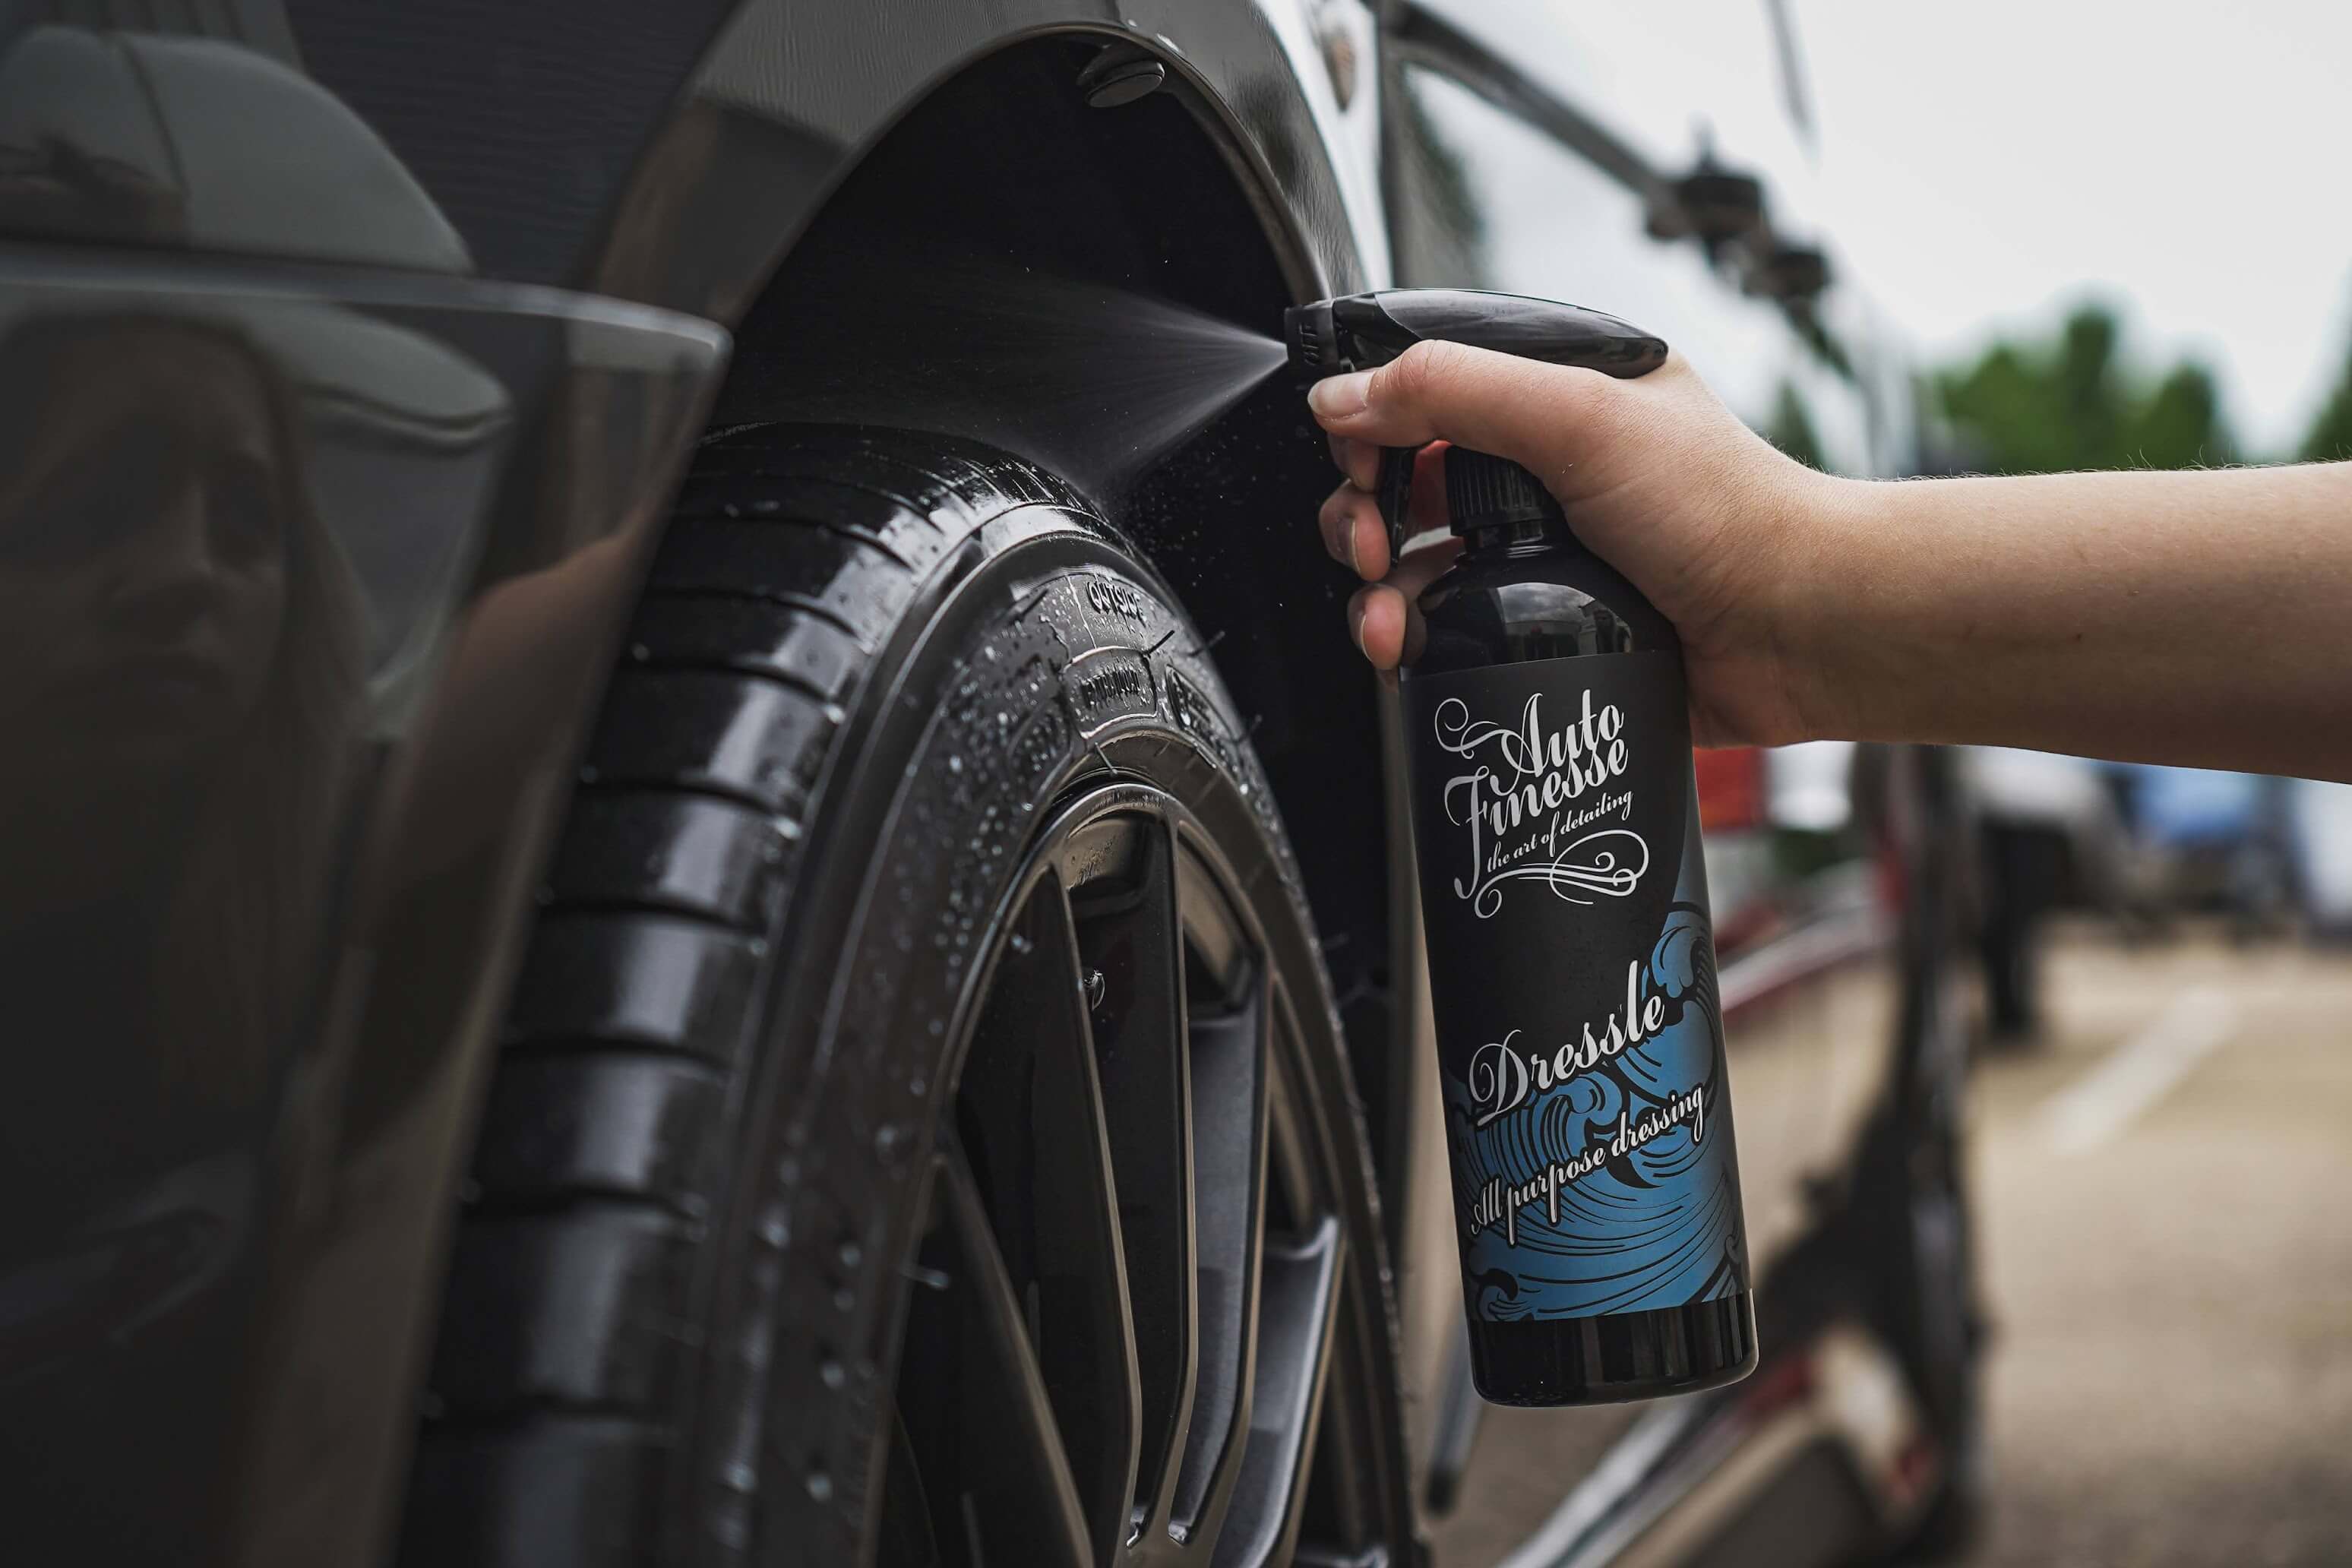 Auto Finesse Gloss Tyre Dressing, 500 ml